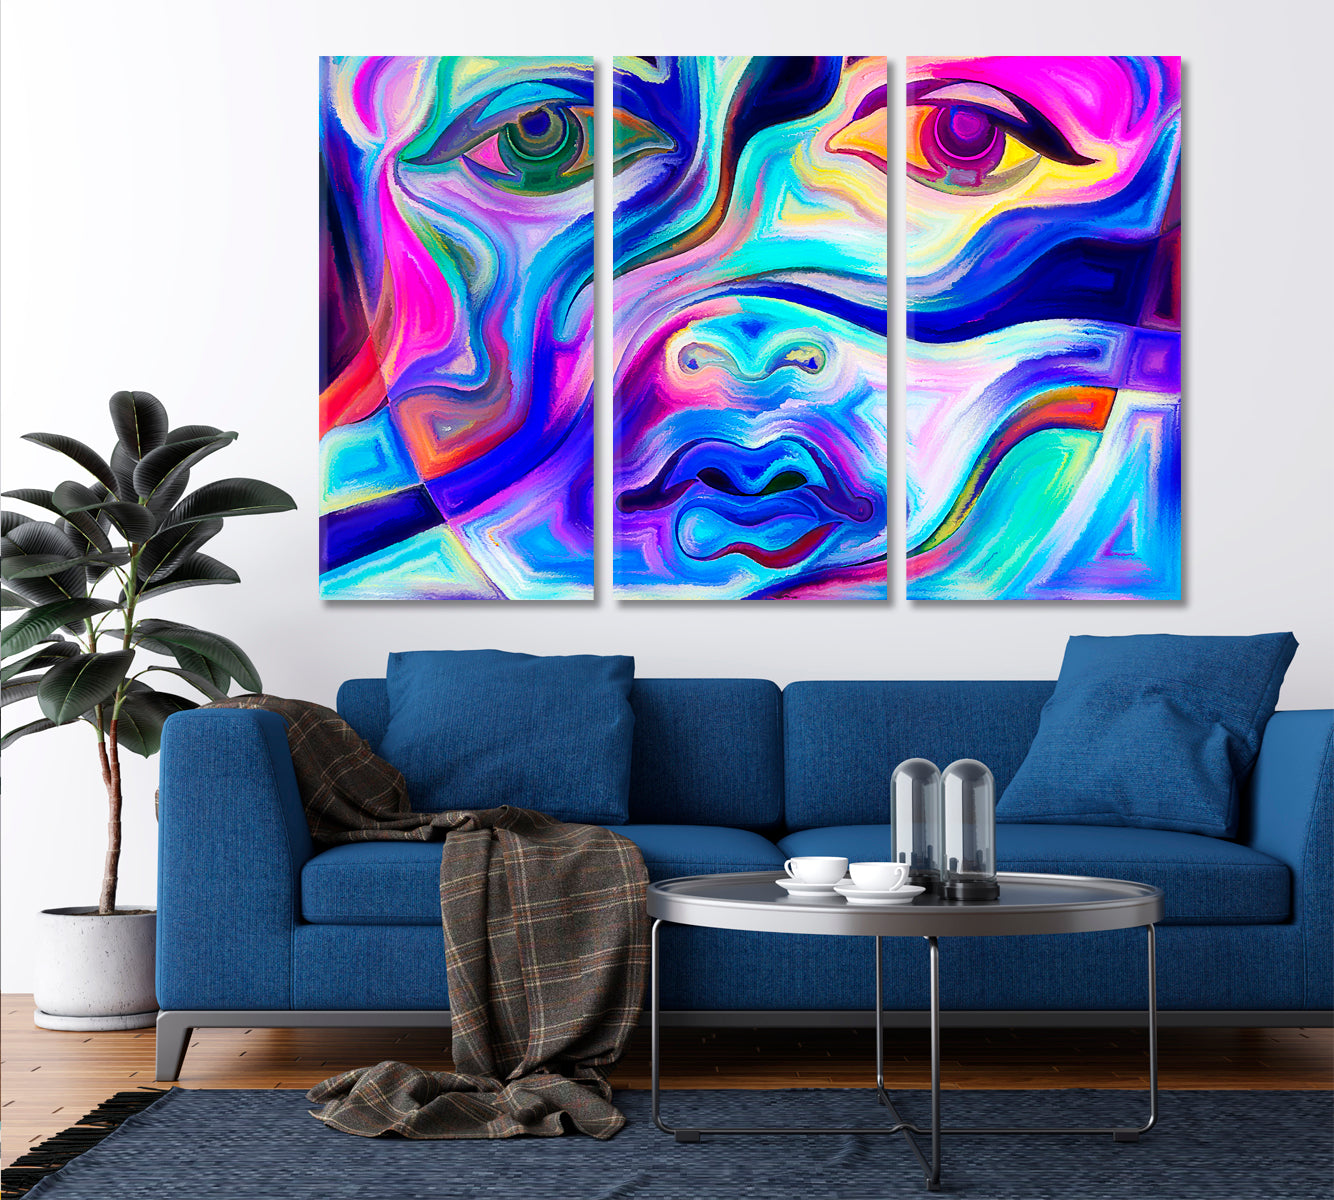 Vivid Frame of Mind Abstract Face Contemporary Art Artesty 3 panels 36" x 24" 